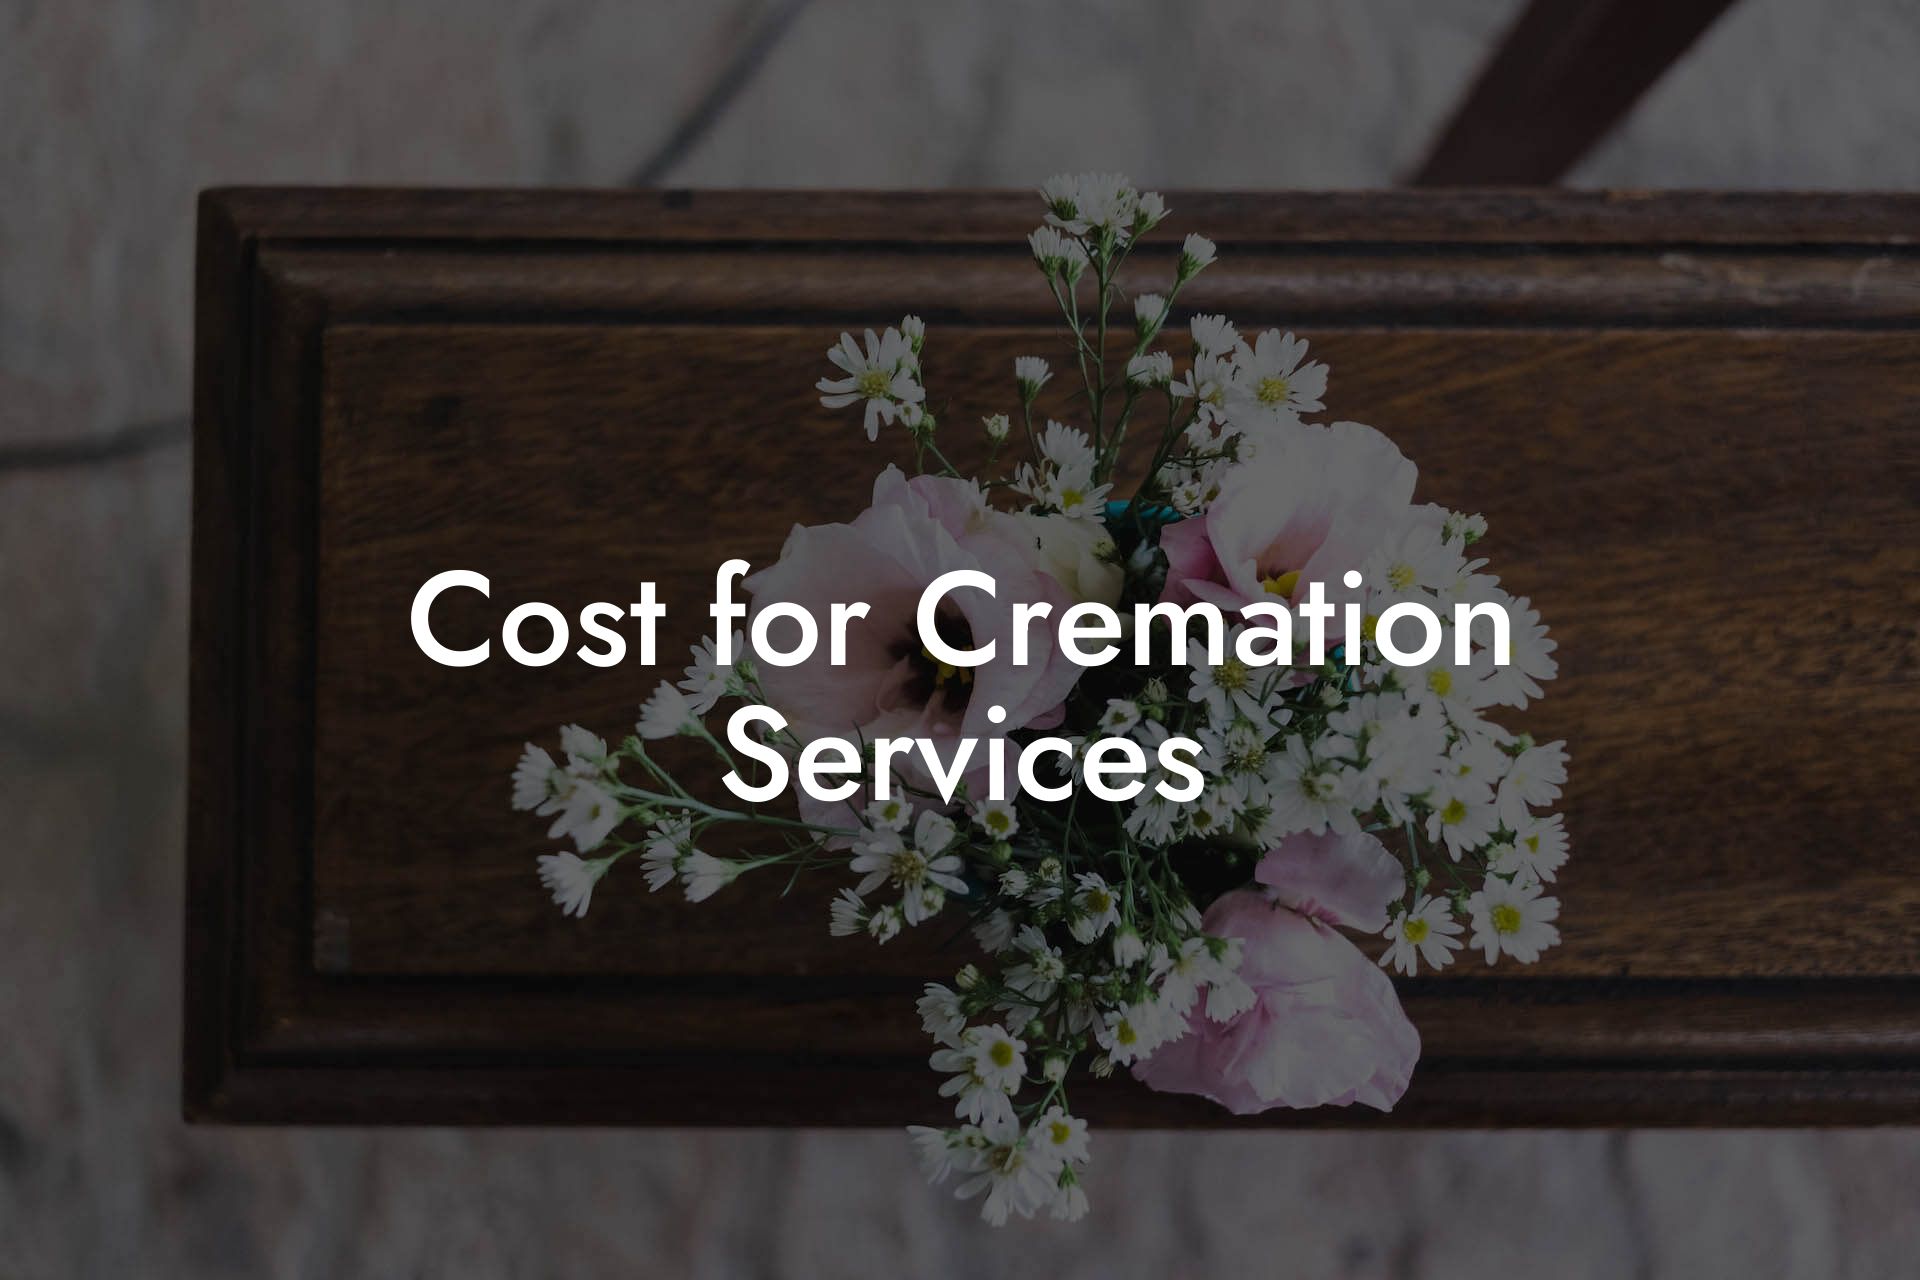 Cost for Cremation Services